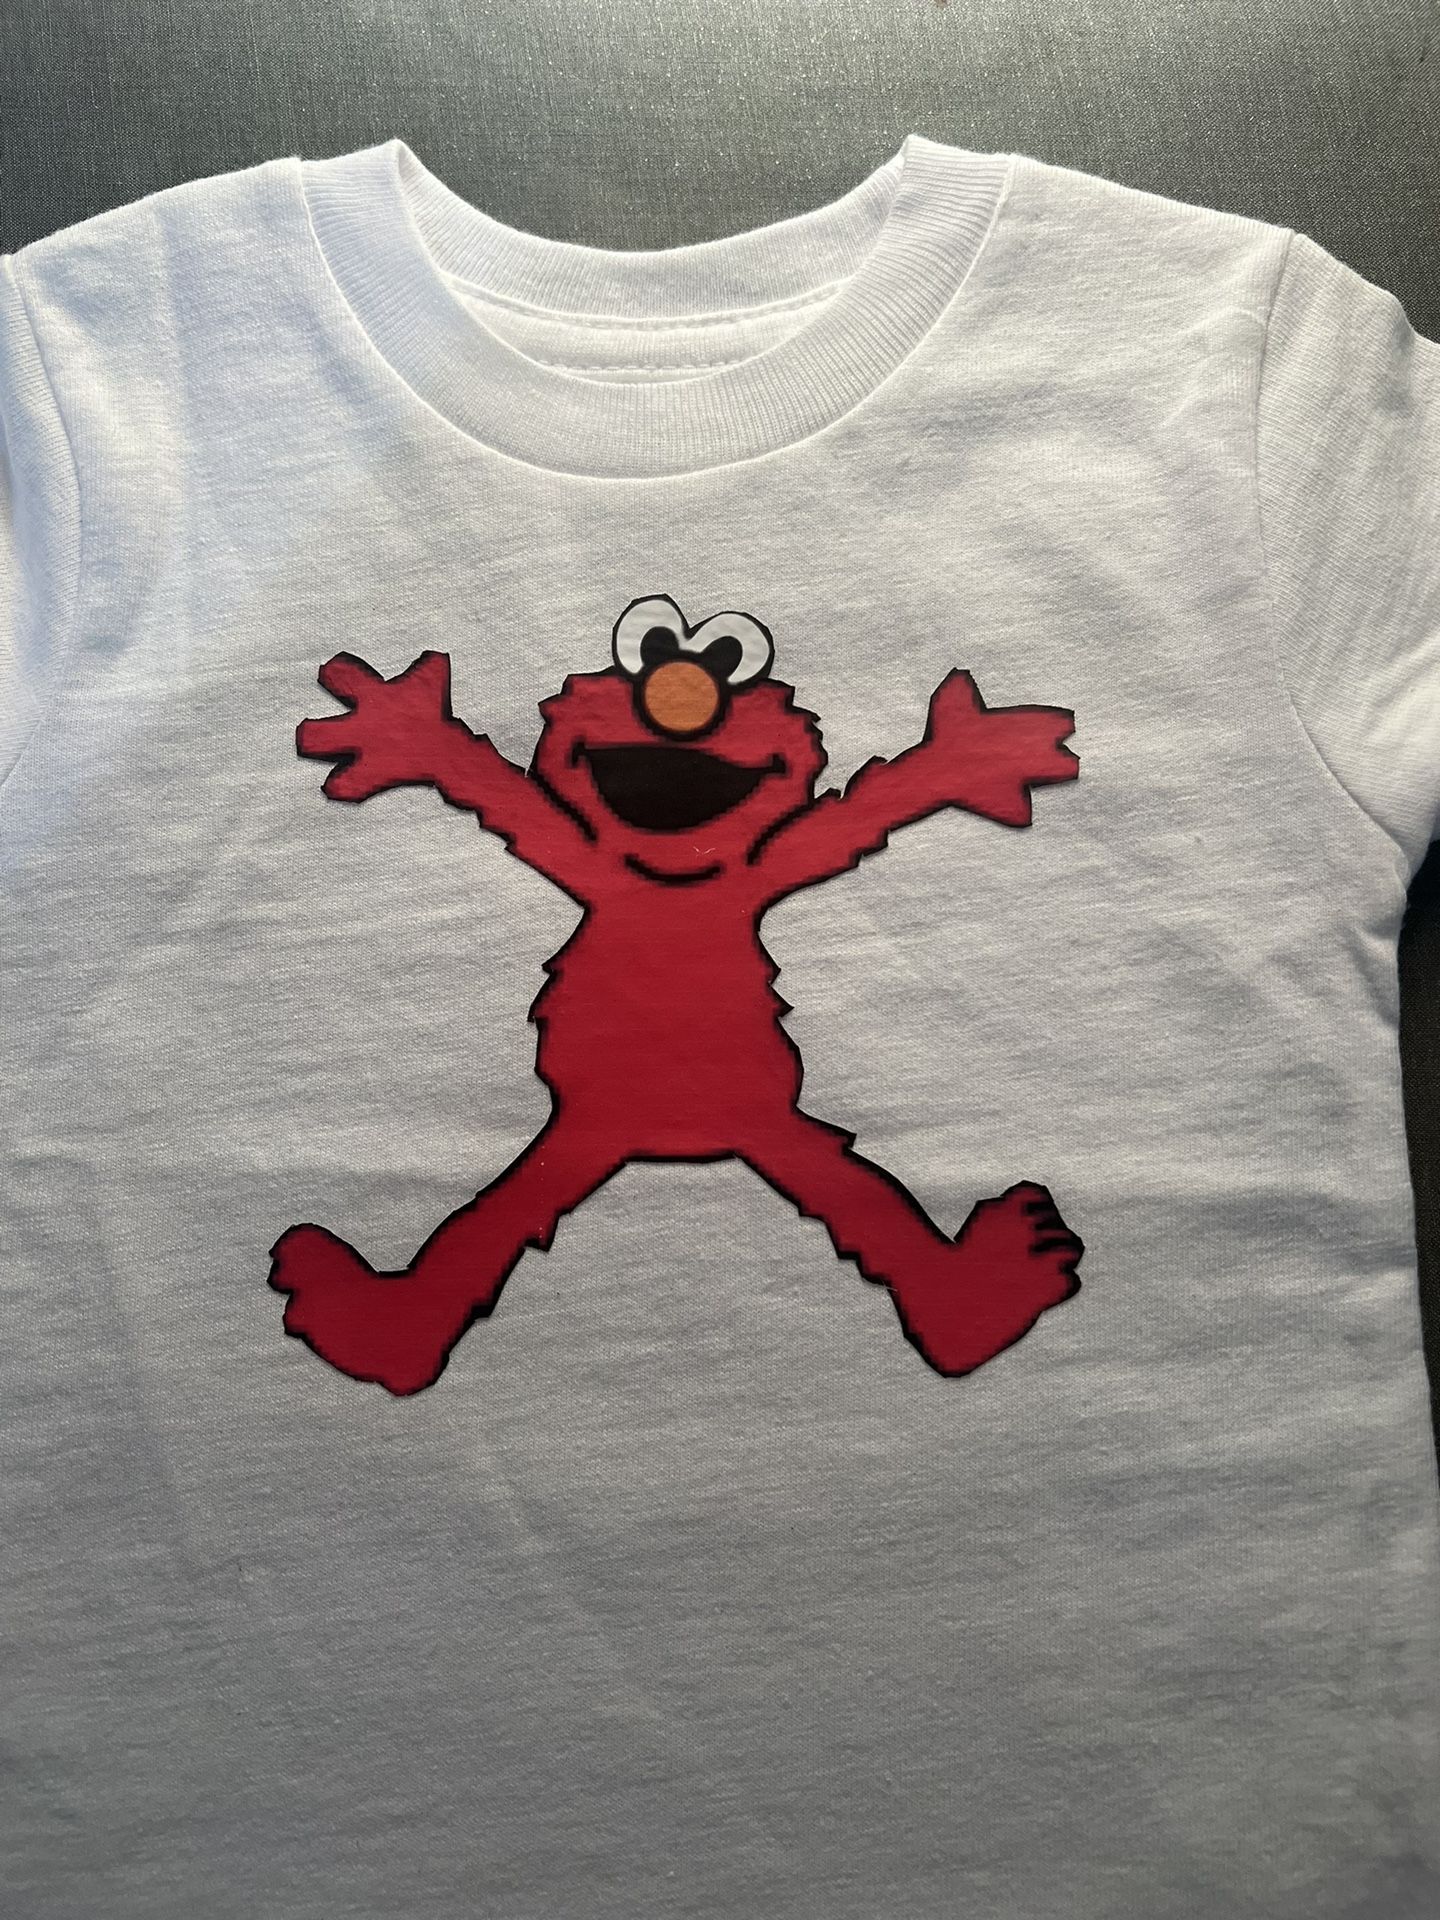 Elmo Onesie Or T-shirt.  Can Personalize!